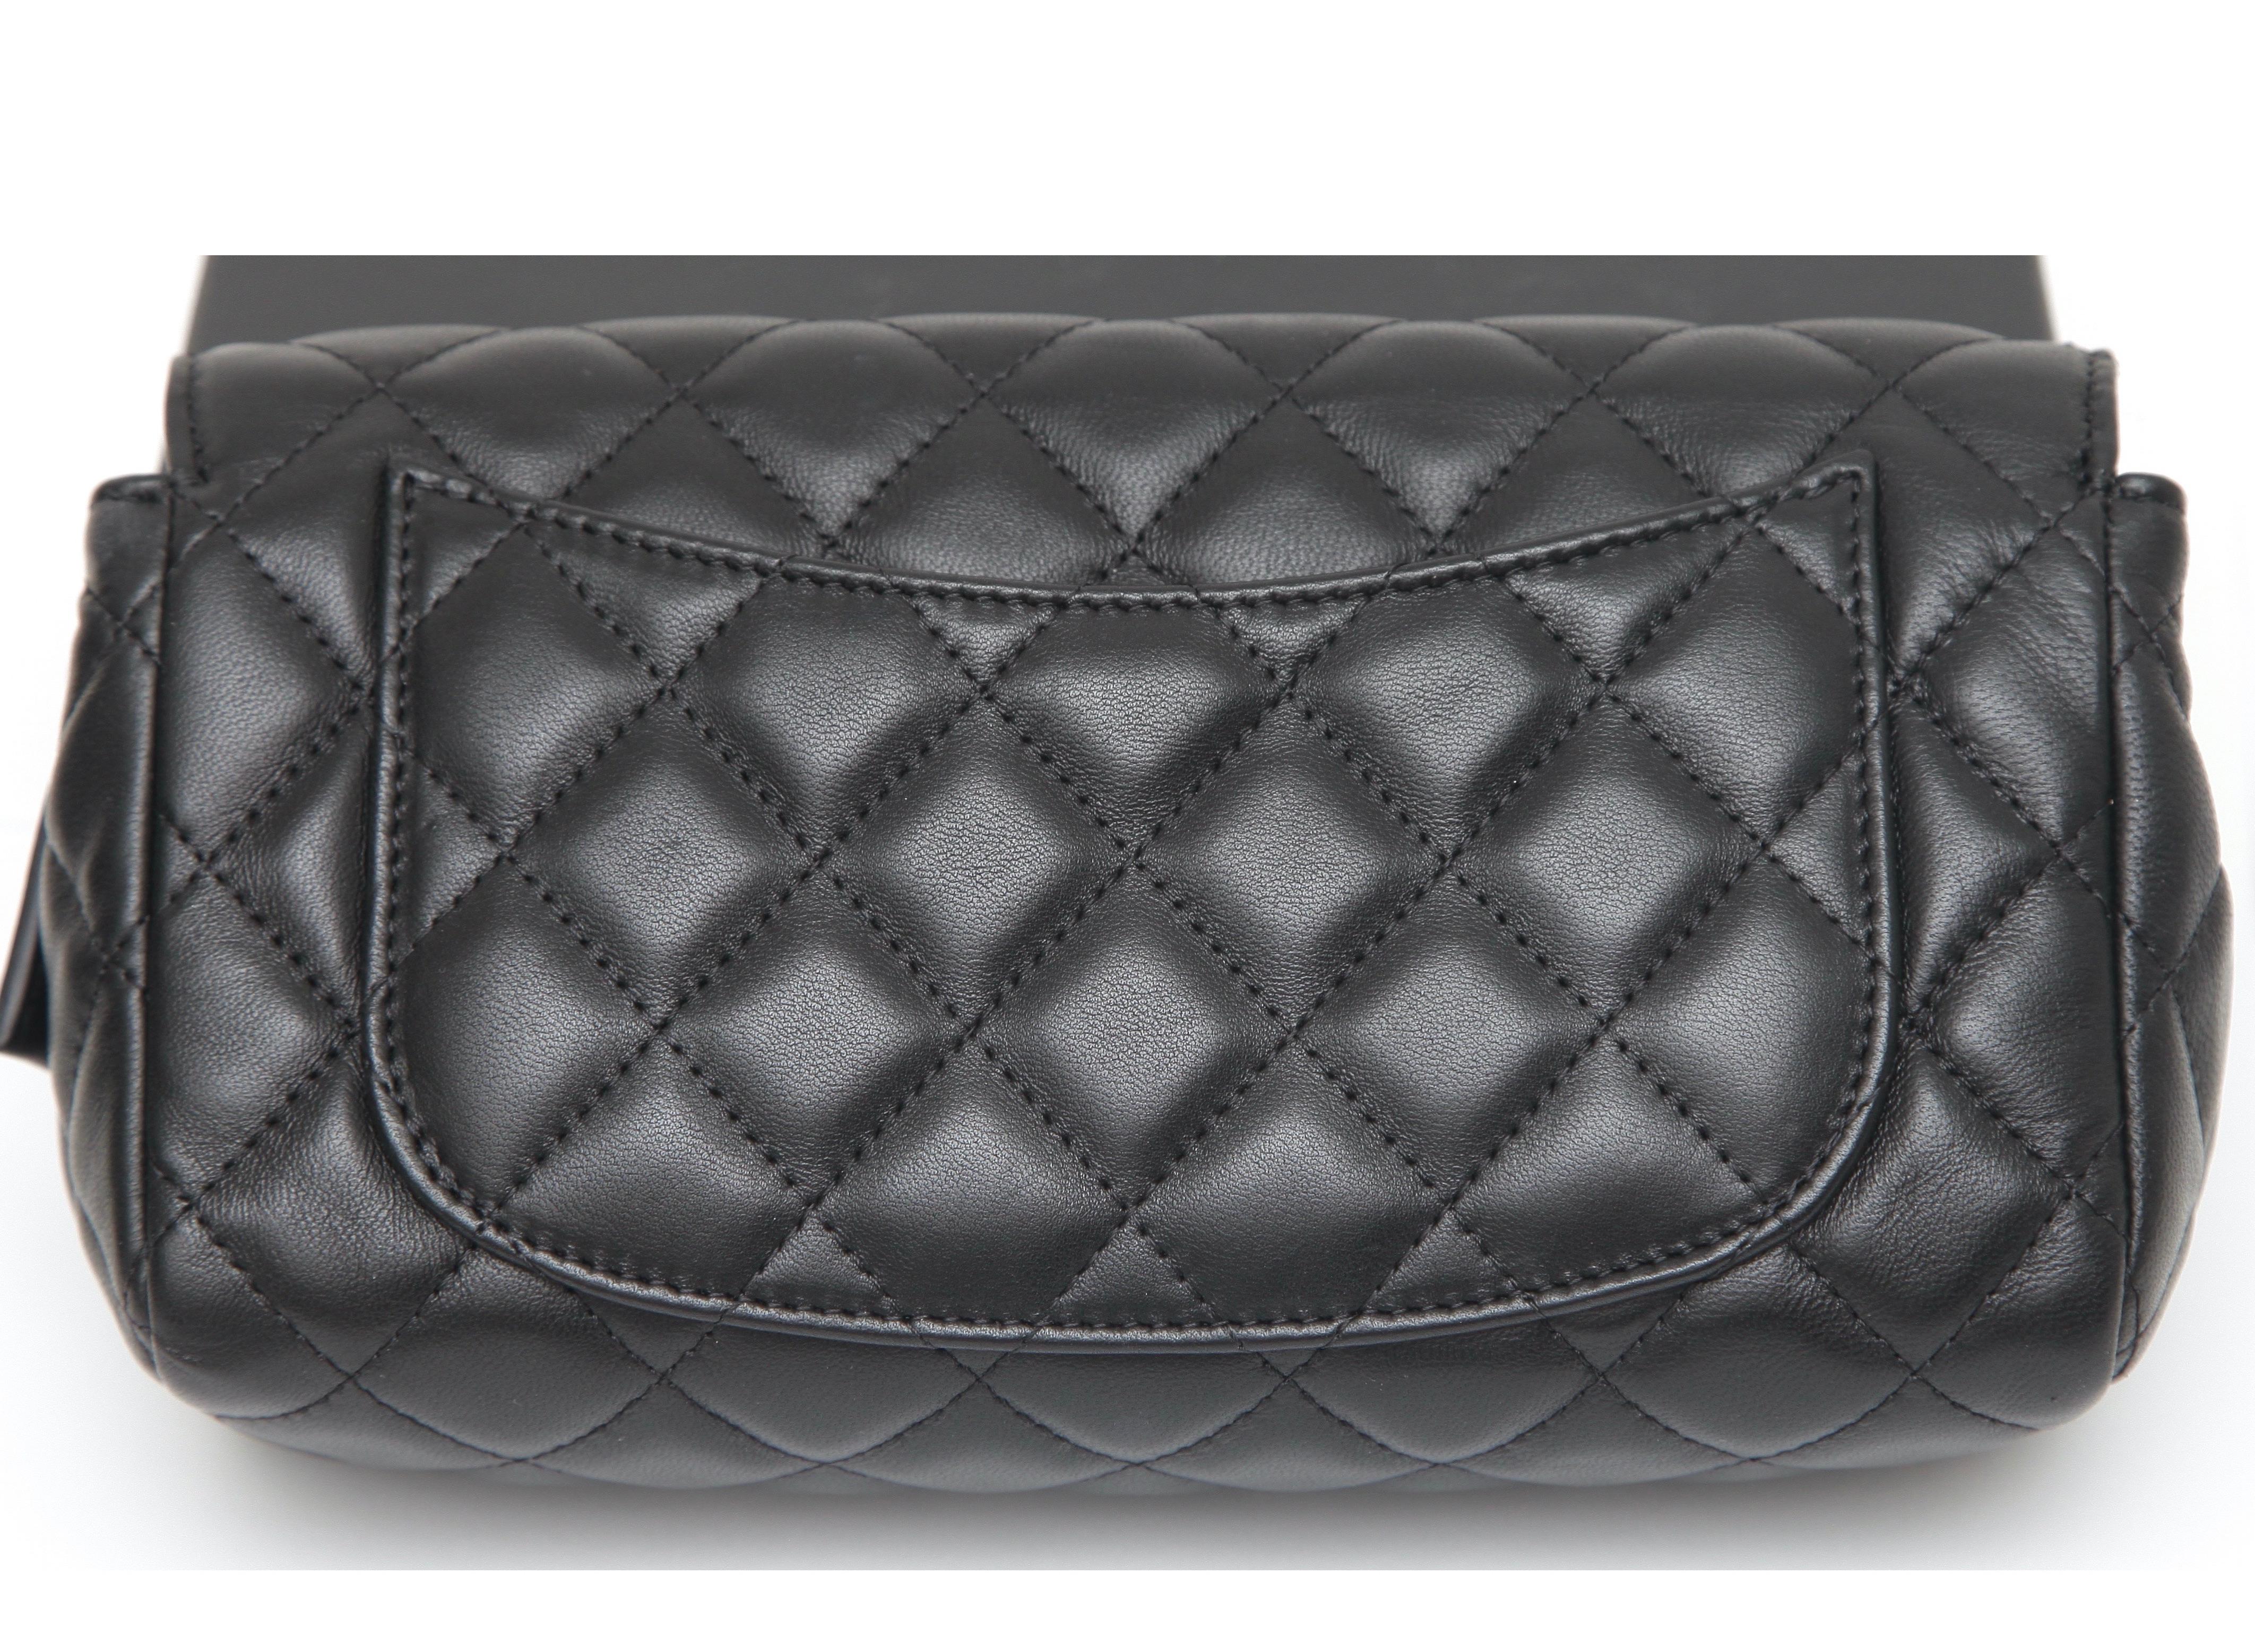 GUARANTEED AUTHENTIC CHANEL 13C BLACK LAMBSKIN QUILTED O-COIN CASE

Details:
- Black lambskin quilted leather.
- Can be used for cosmetics and/or daily items.
- Front flap.
- Silver-tone CC logo at front.
- Snap closure.
- Interior lined in burgundy